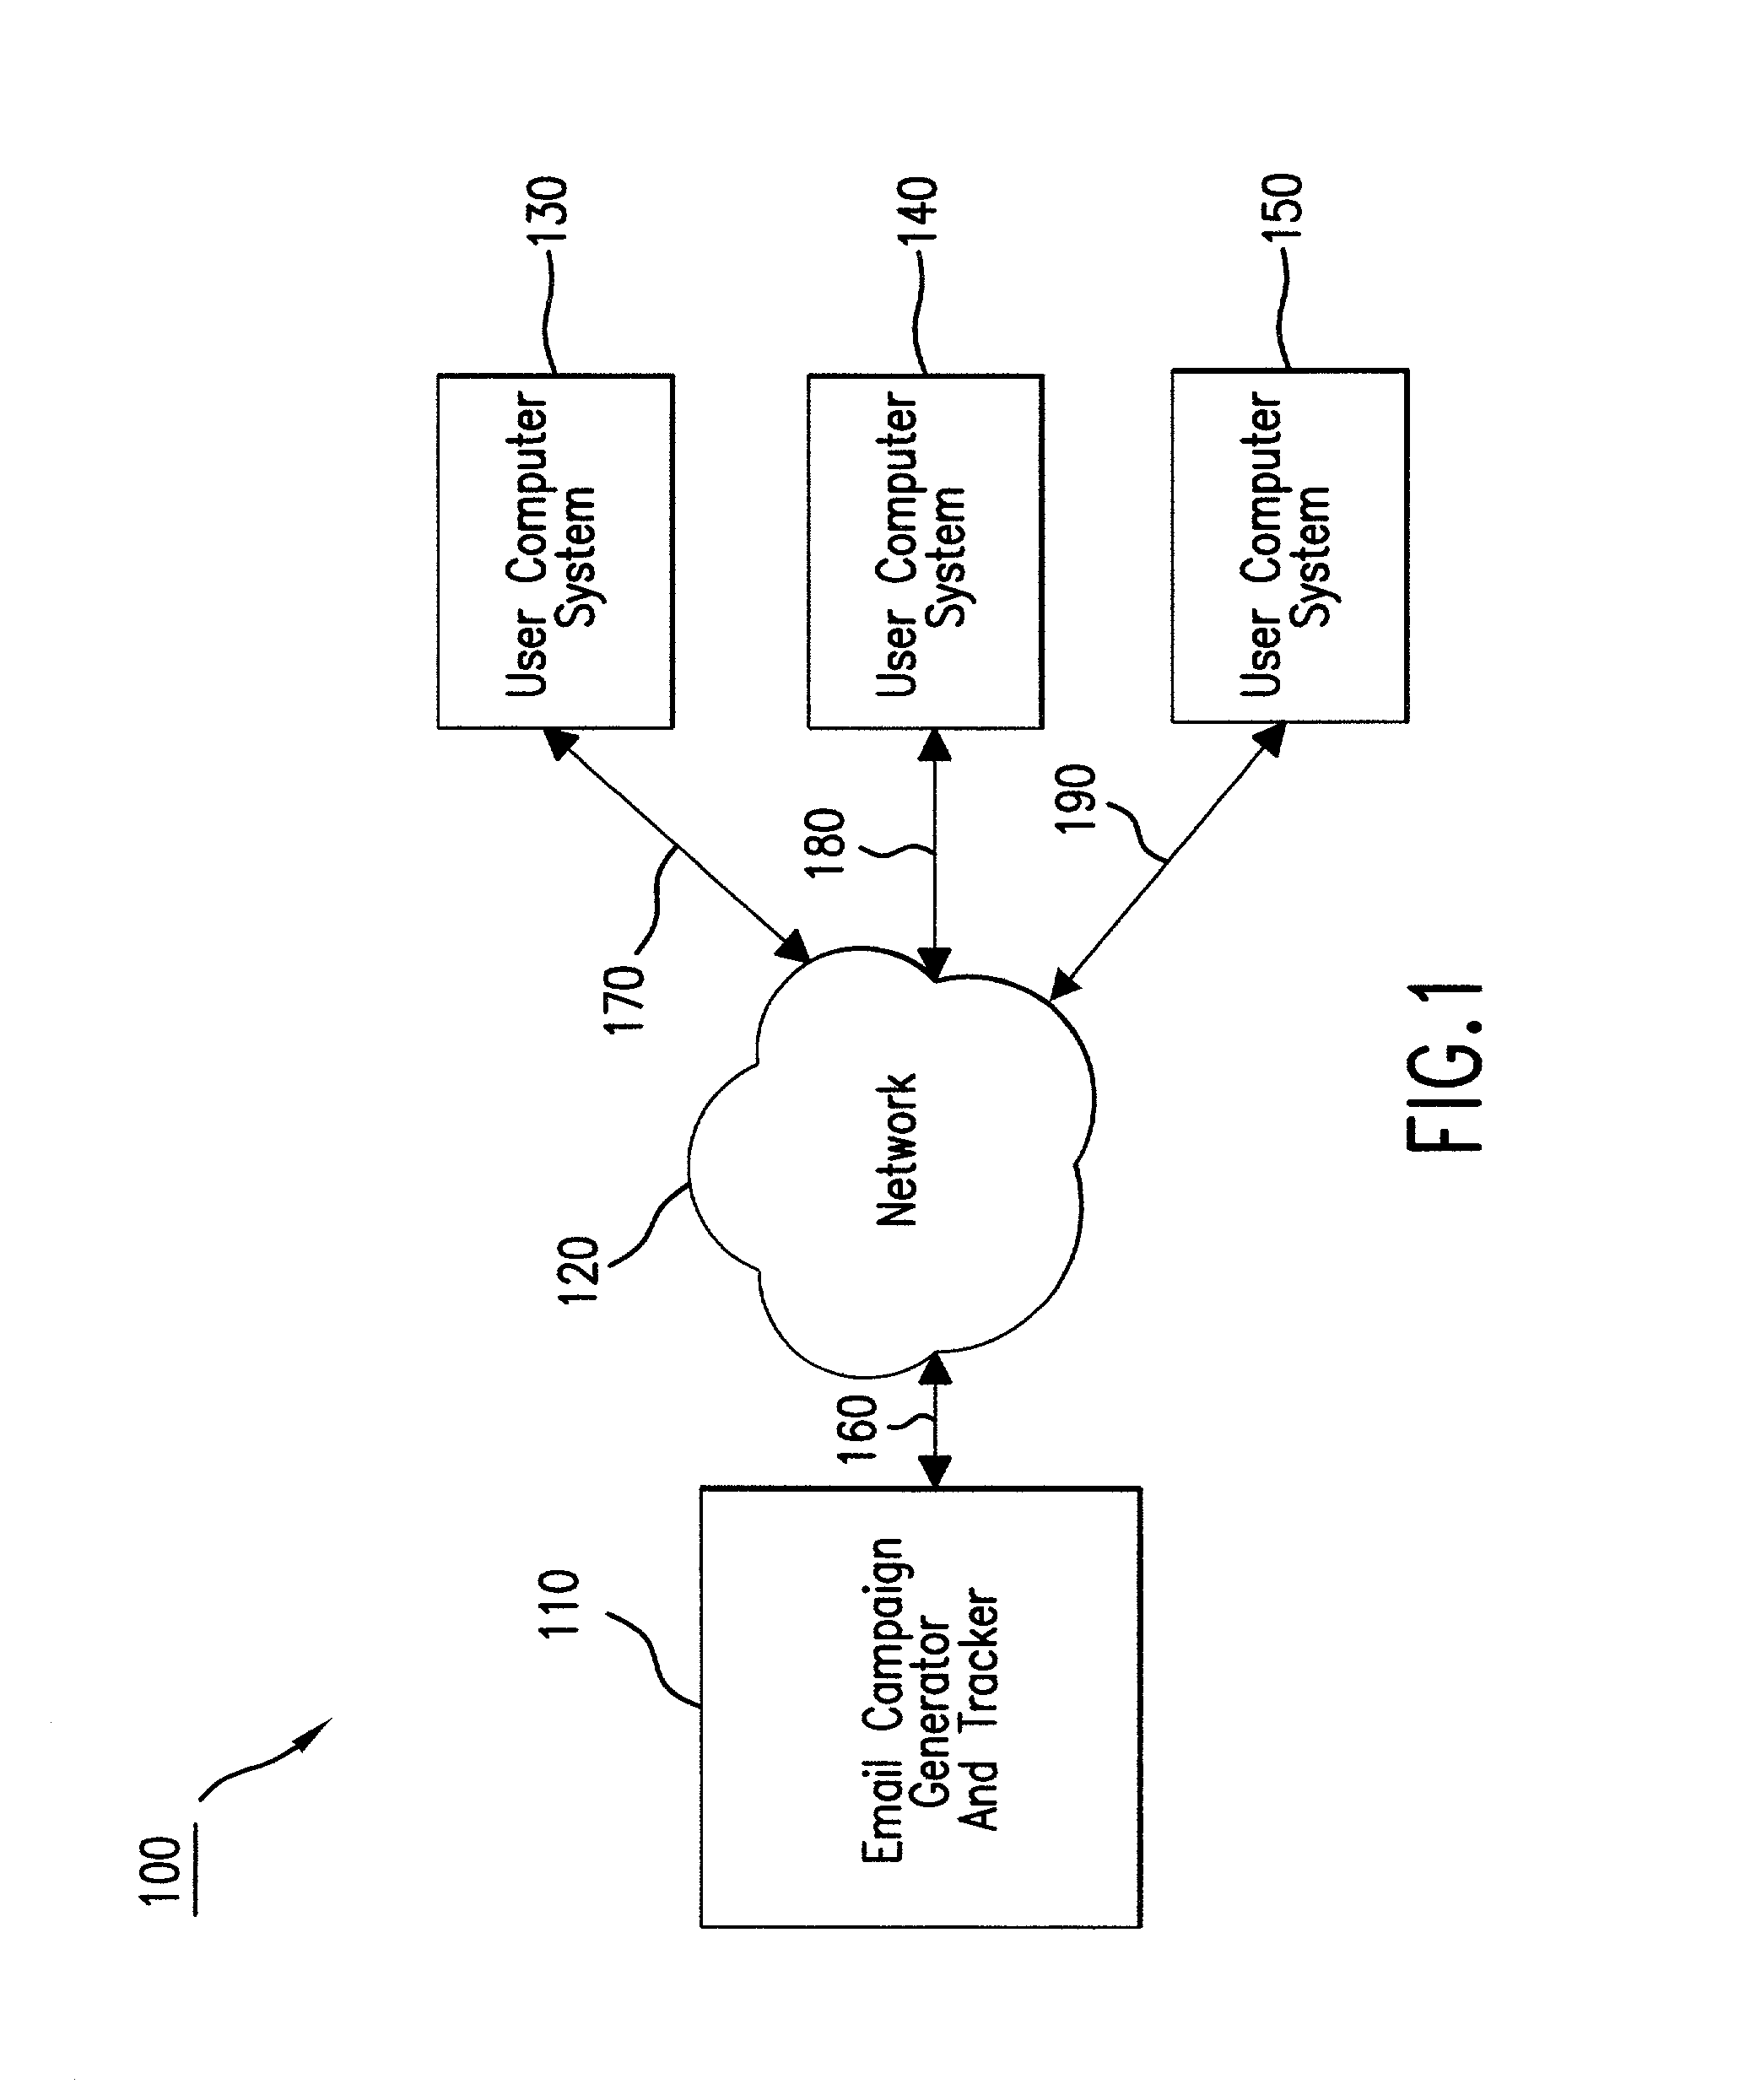 System and method related to generating and tracking an email campaign